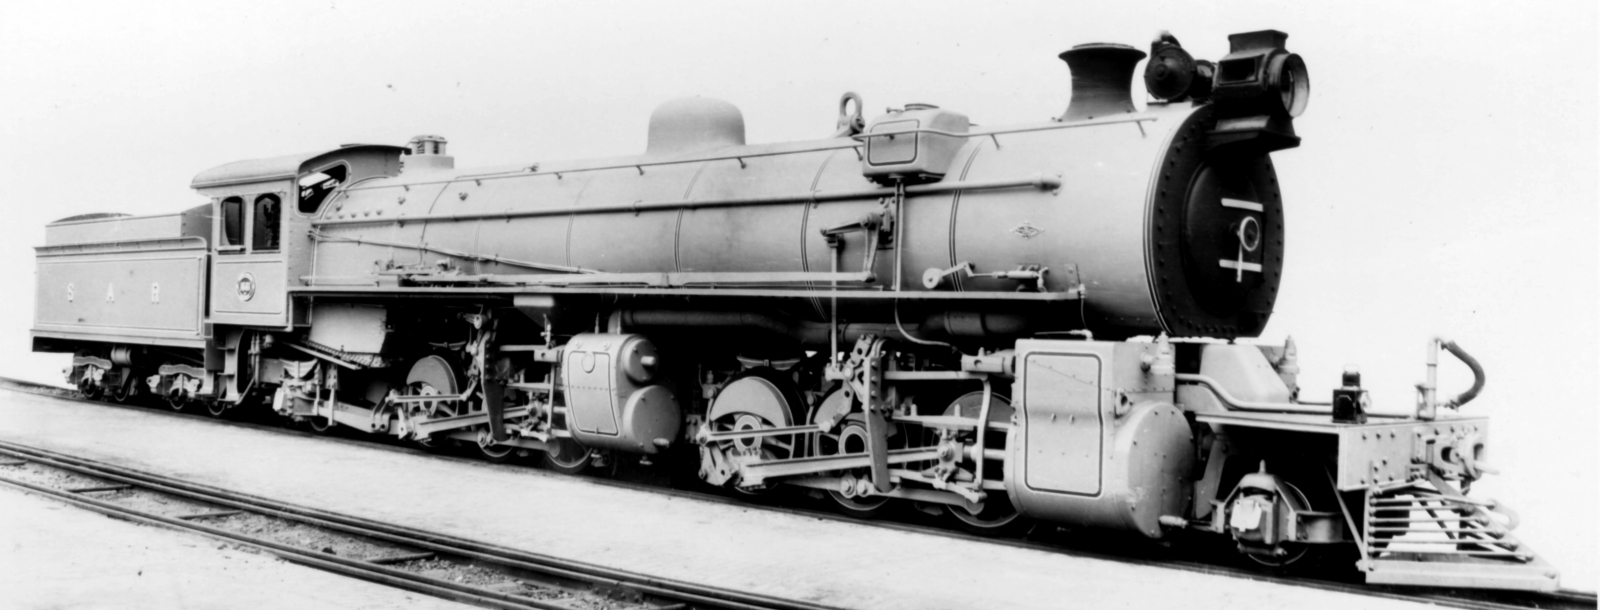 No. 1661 on a works photo